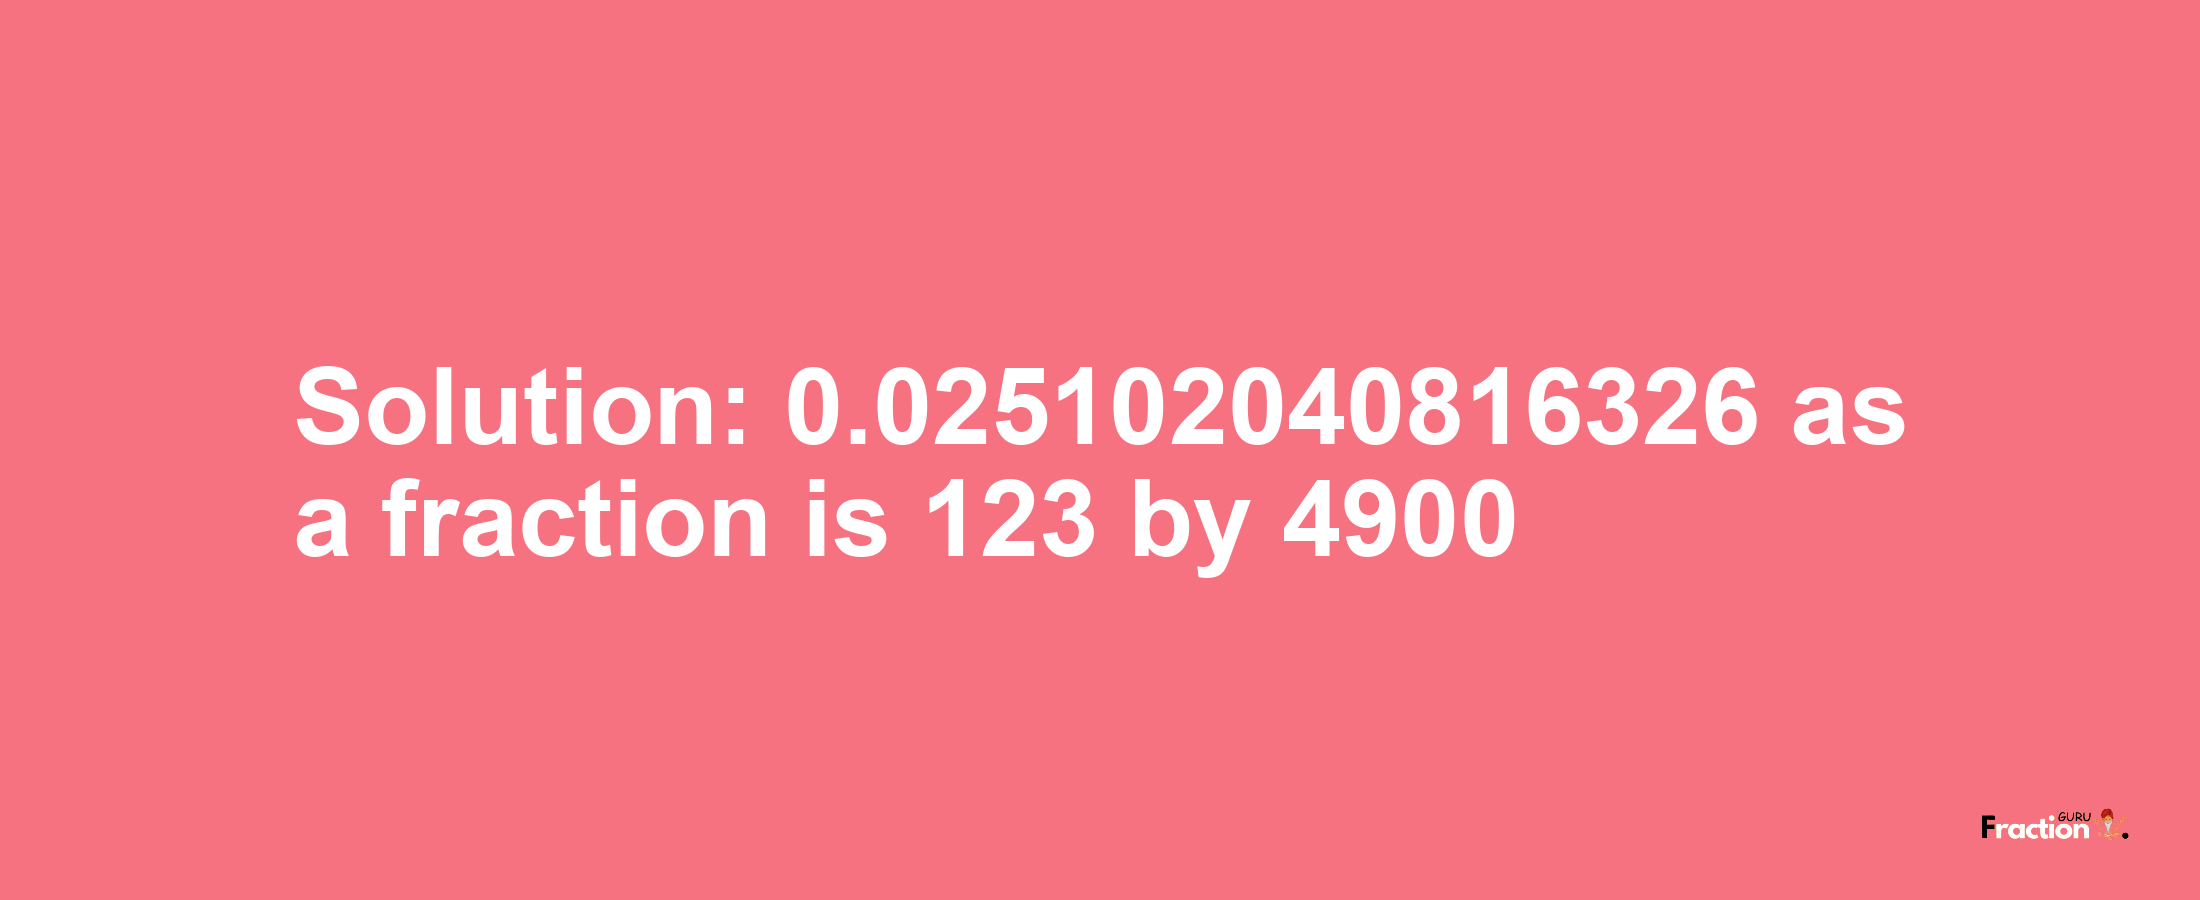 Solution:0.025102040816326 as a fraction is 123/4900